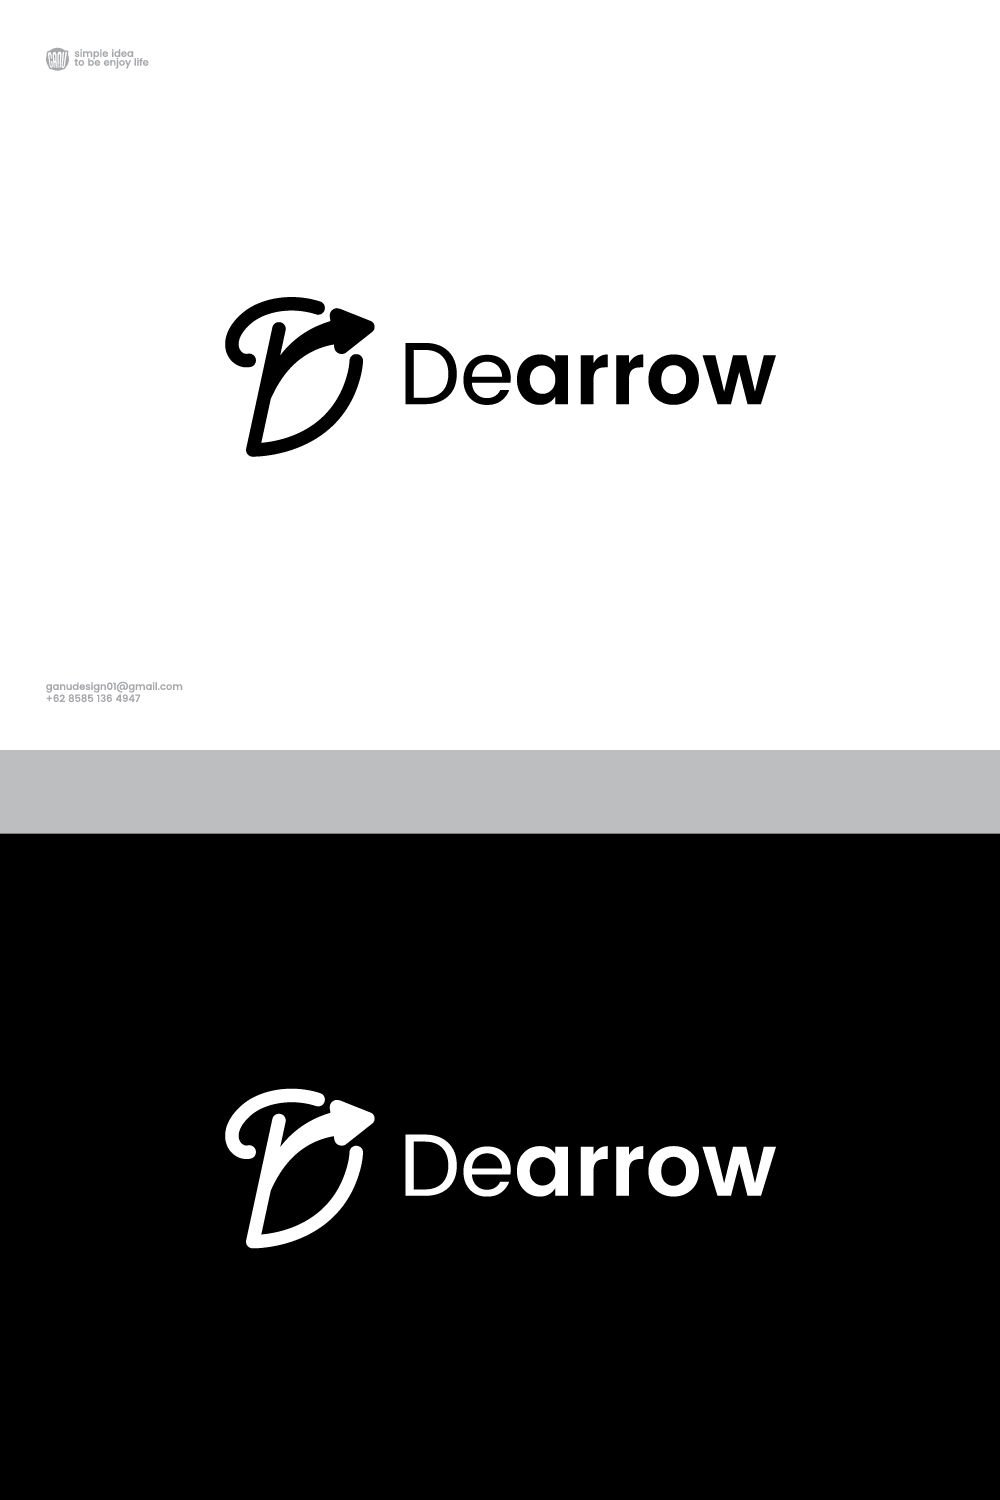 D letter logo with Arrow design for your company pinterest preview image.